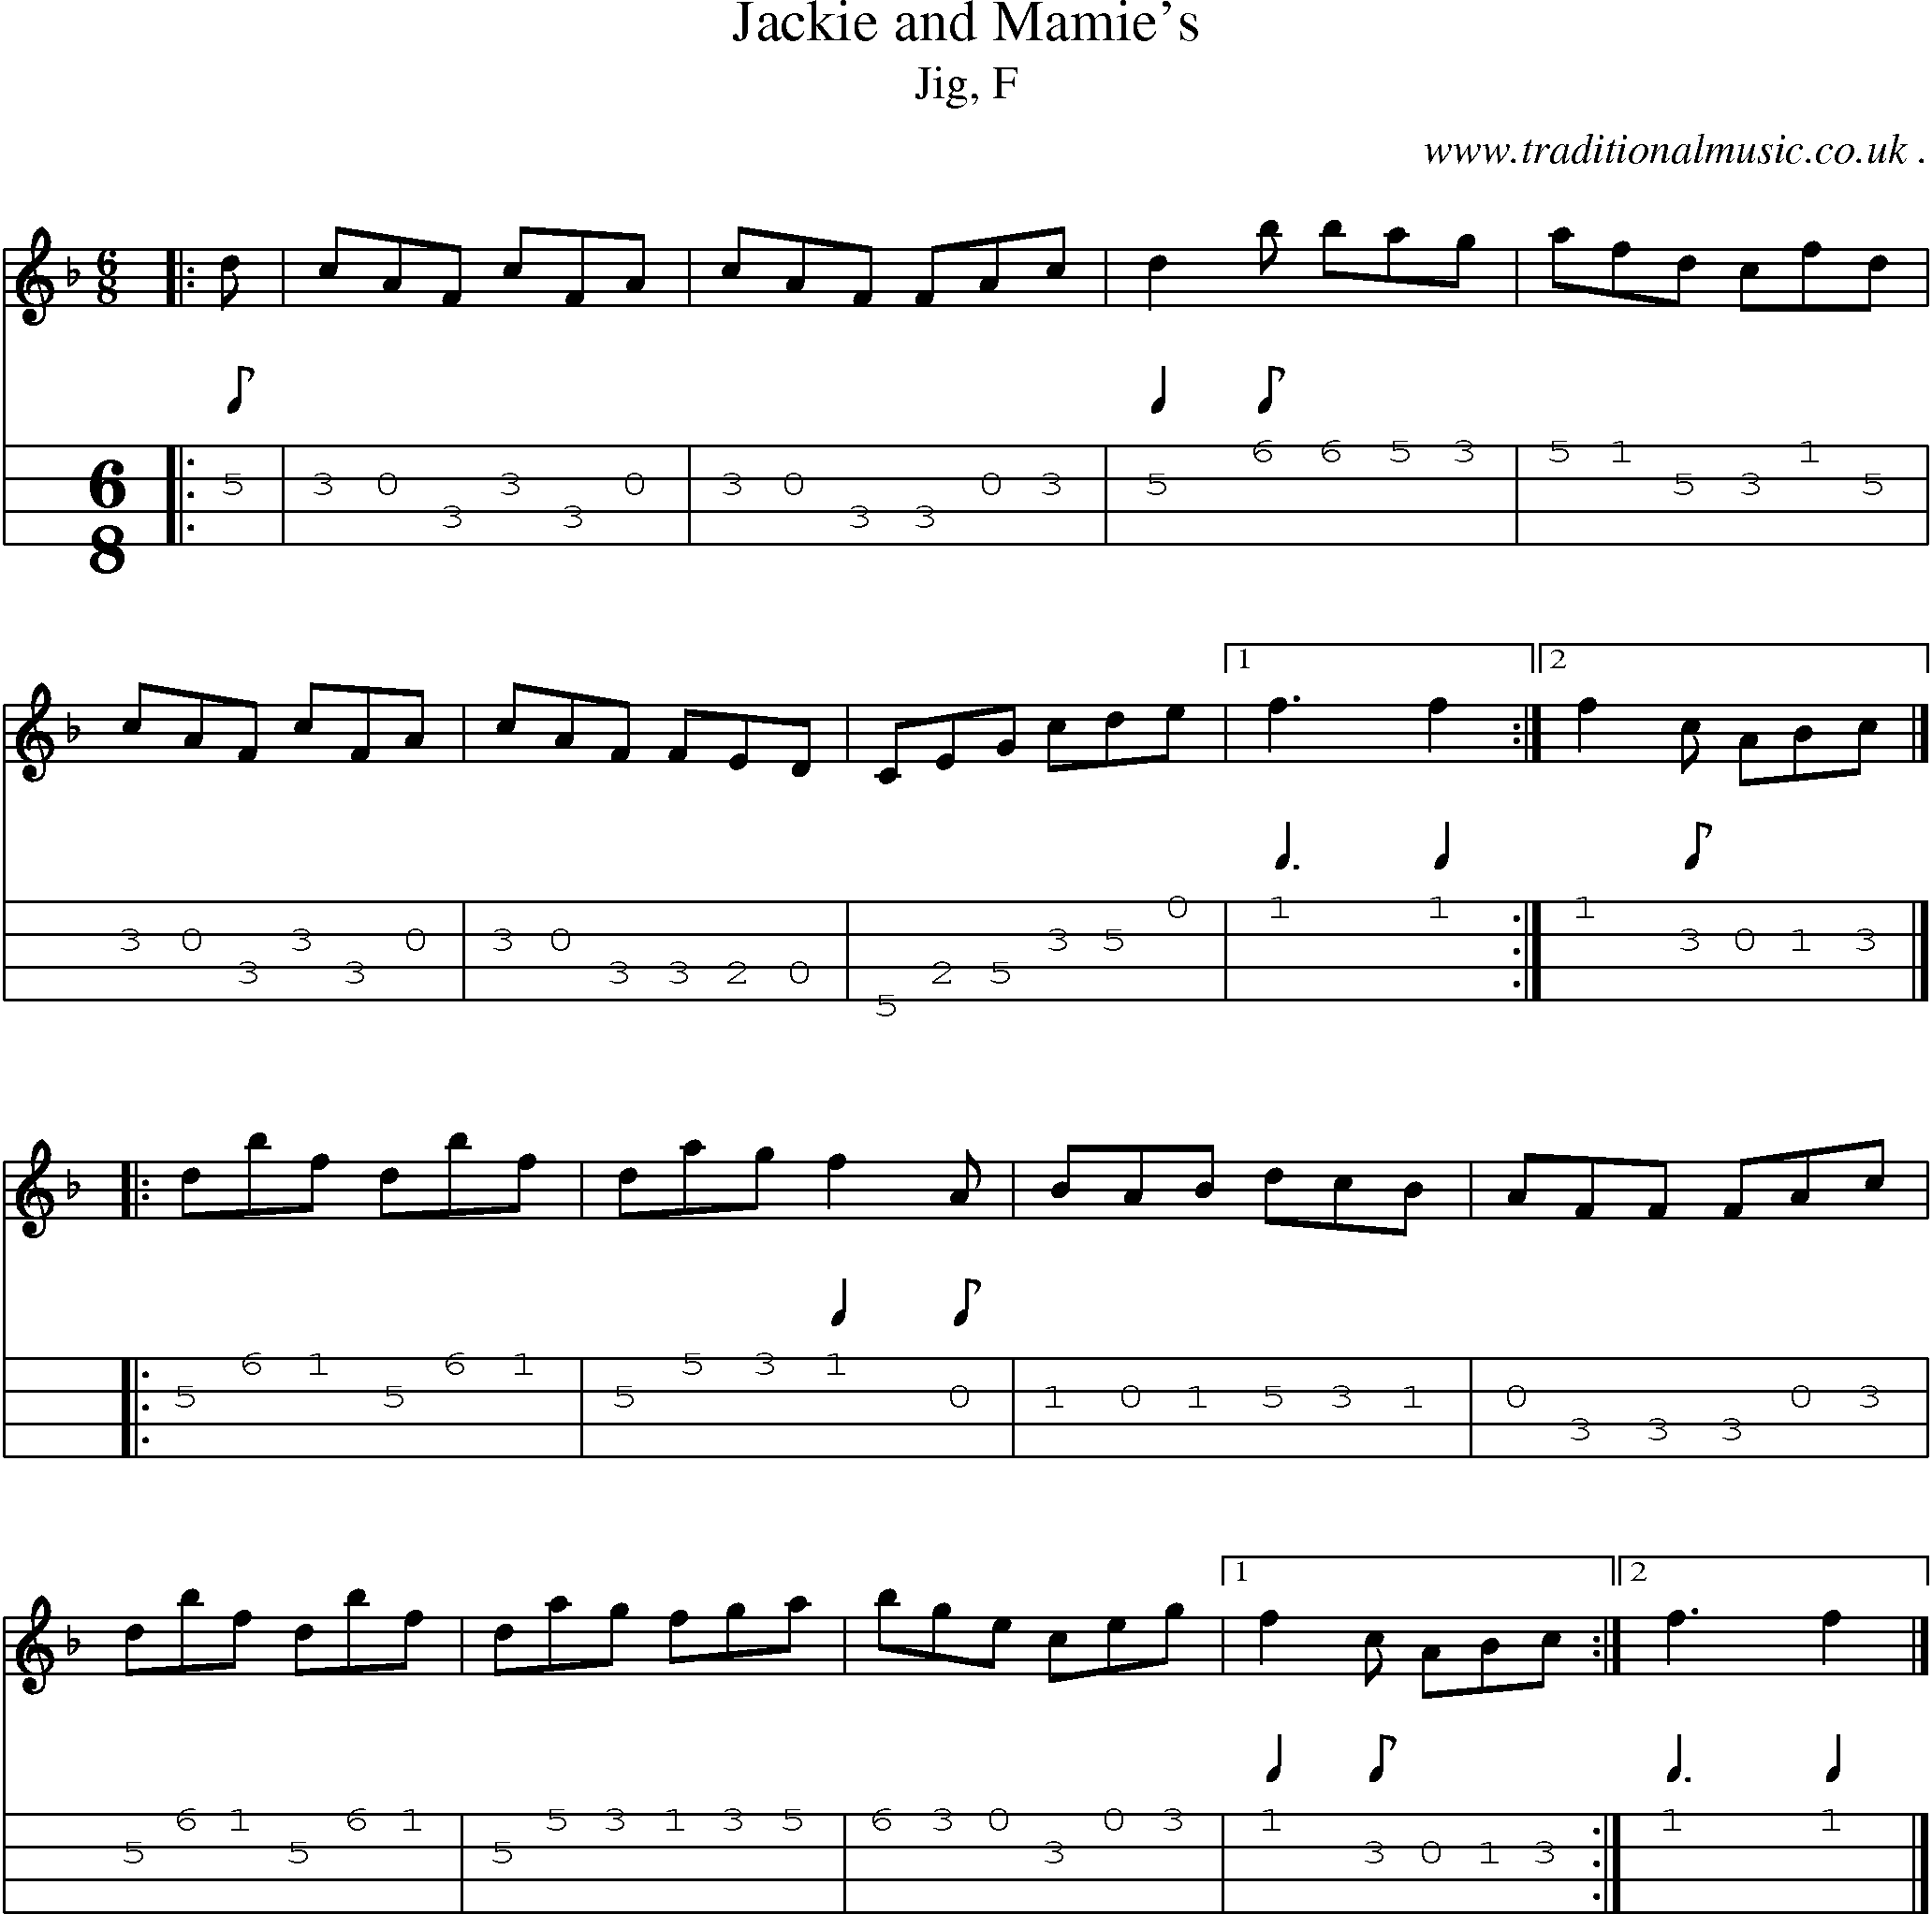 Sheet-music  score, Chords and Mandolin Tabs for Jackie And Mamies